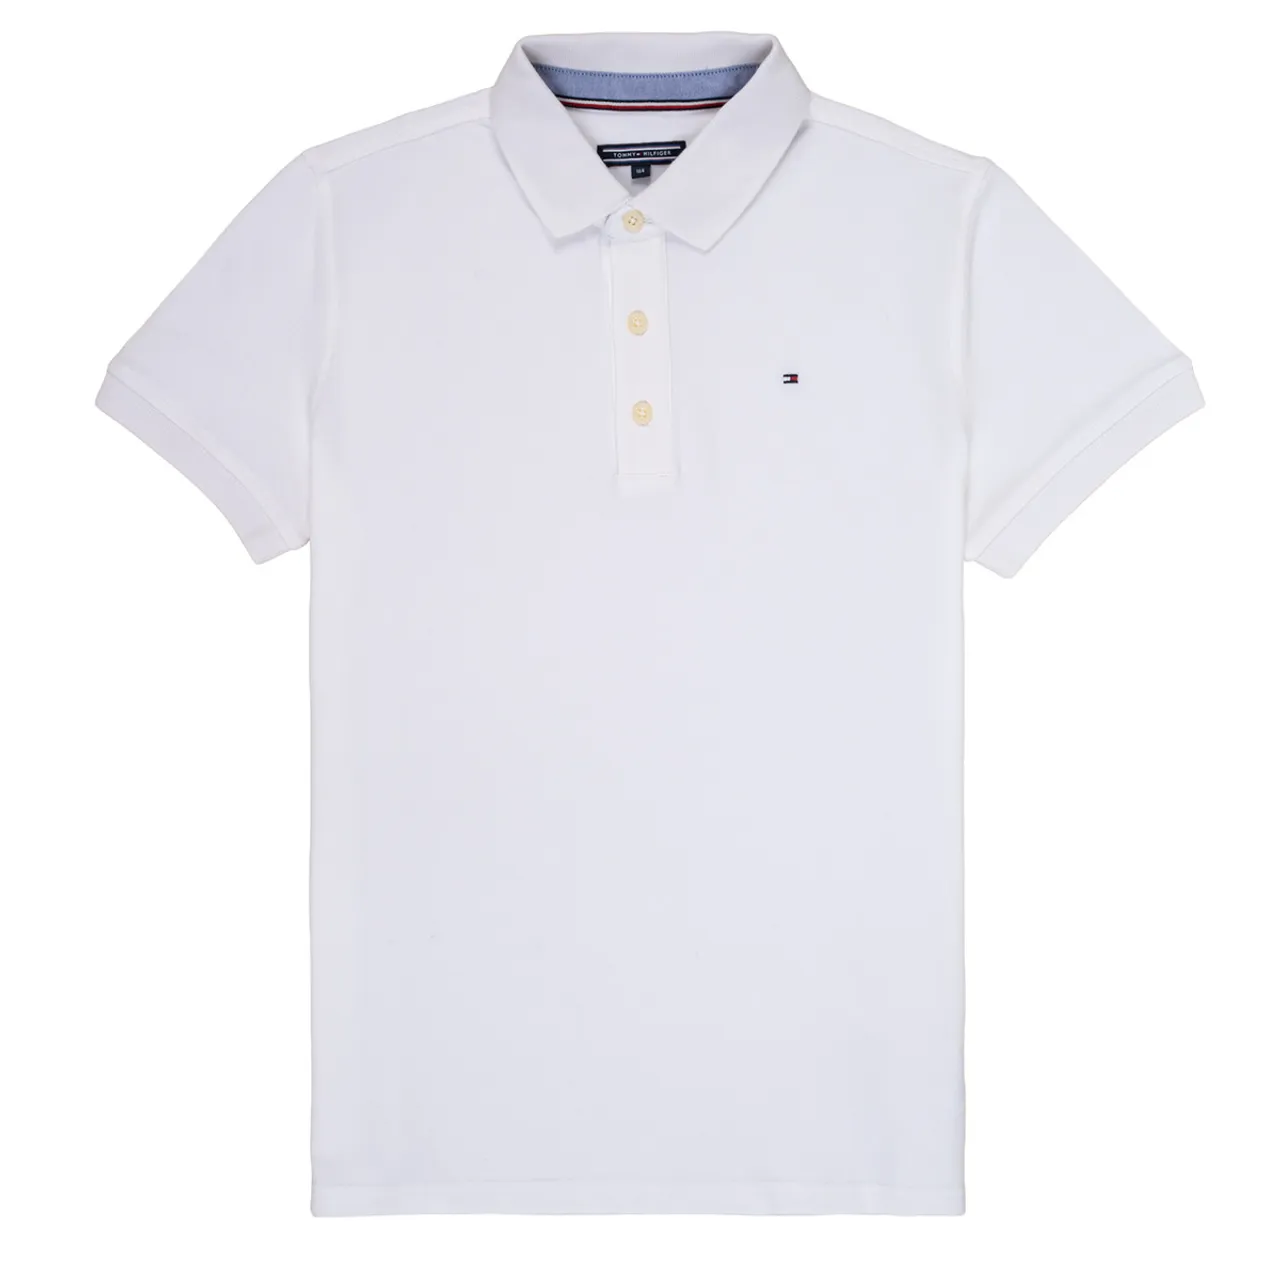 Tommy Hilfiger  KB0KB03975  boys's Children's polo shirt in White